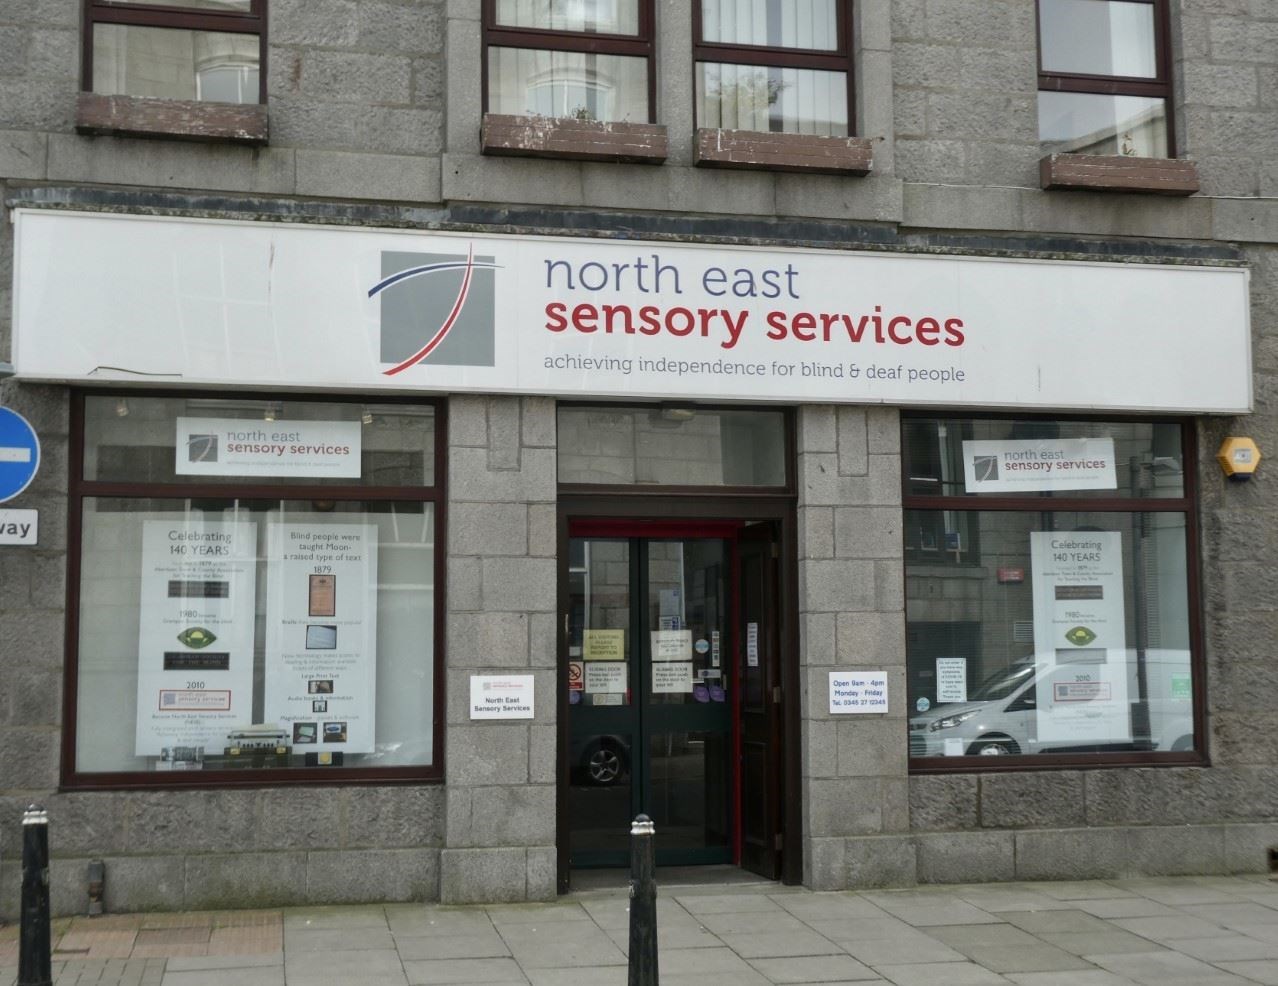 The North East Sensory Services Aberdeen centre is based at 21 John Street.